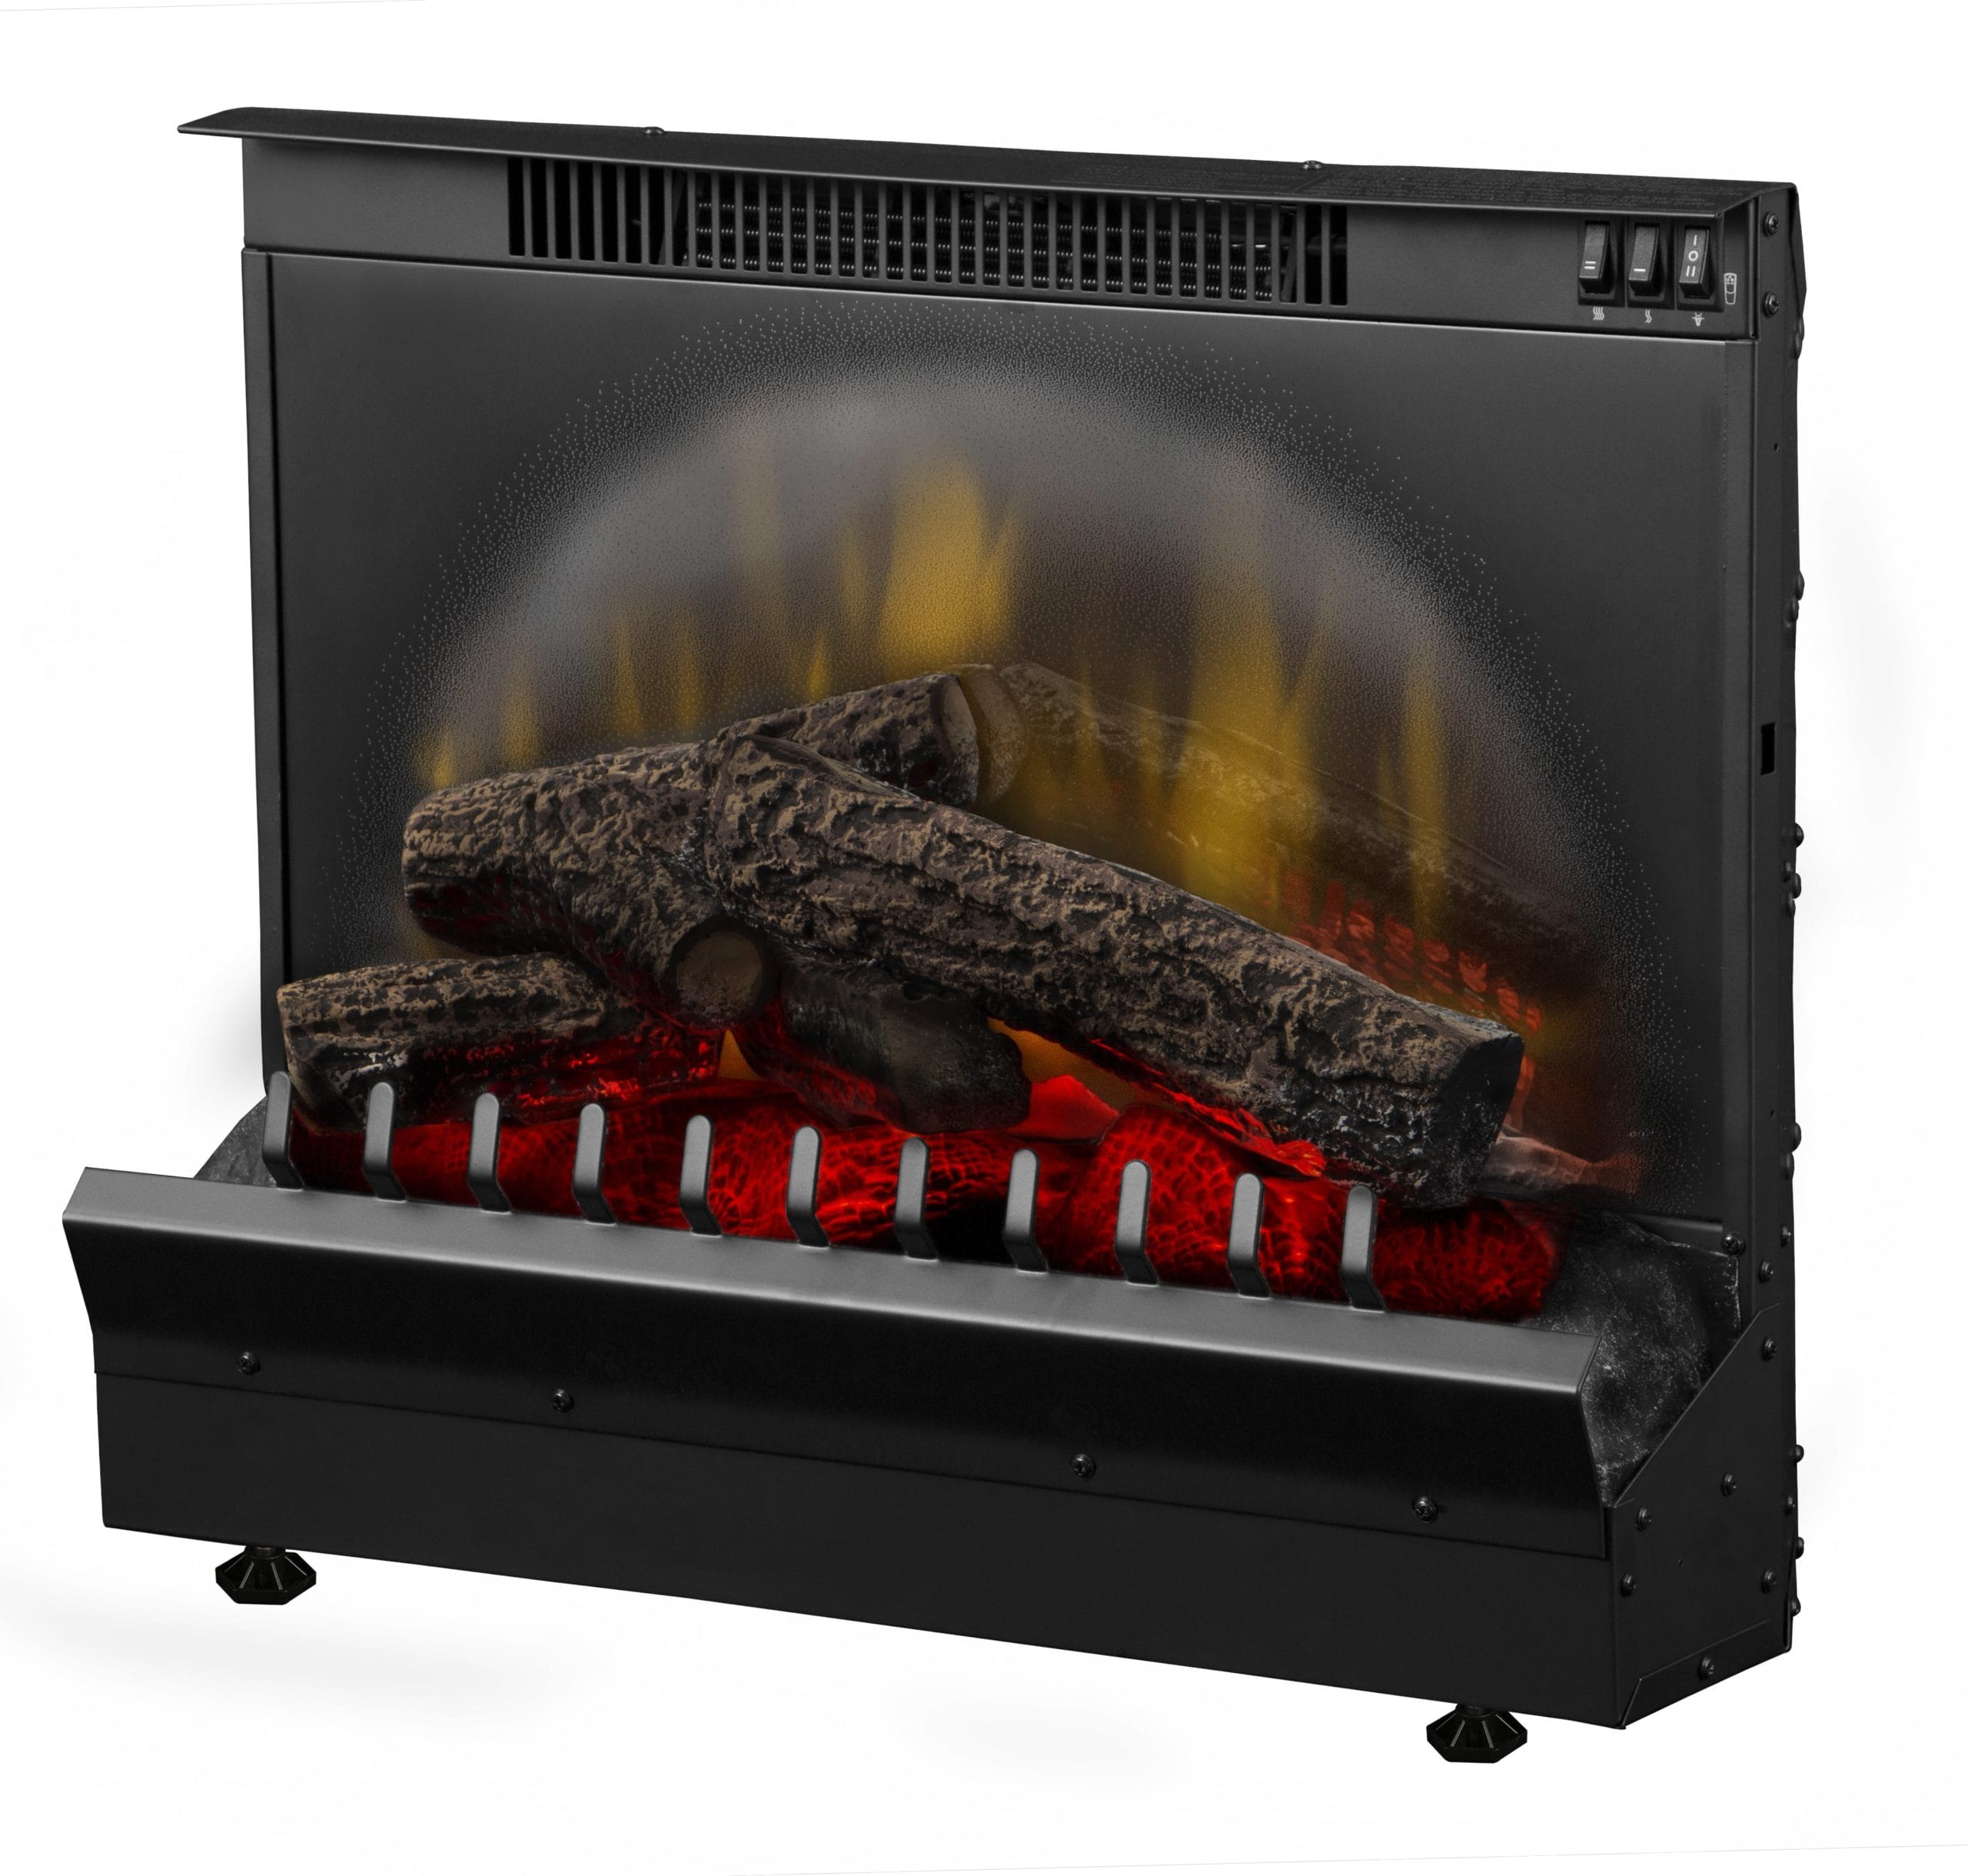 DFI2309 Electric Fireplace Insert by Dimplex